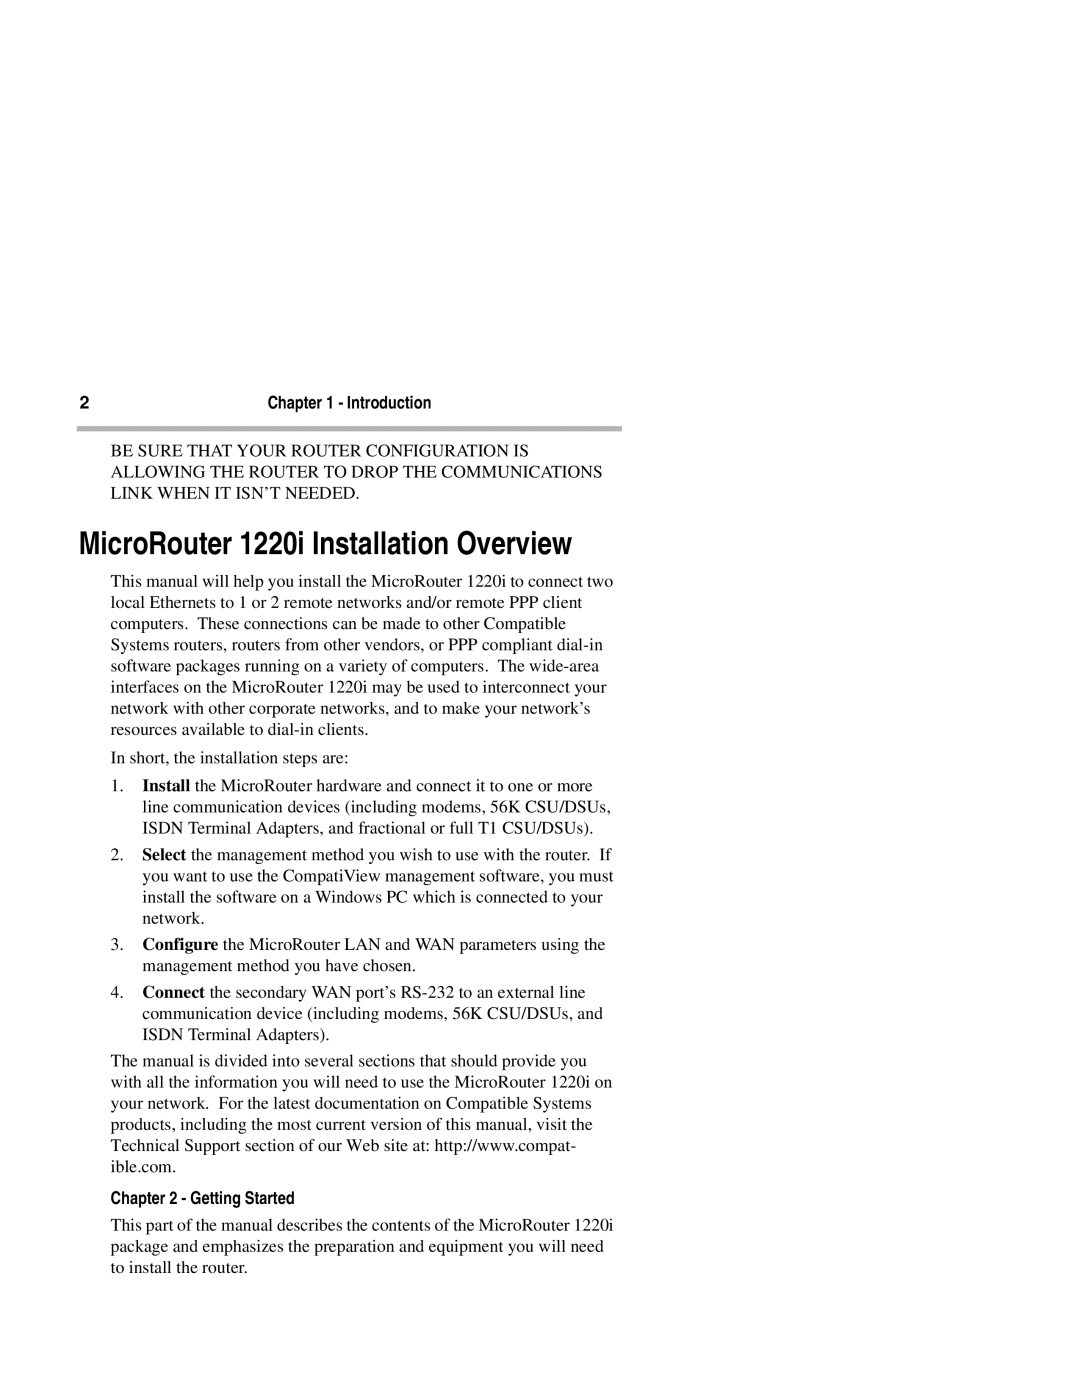 Compatible Systems 1220I manual MicroRouter 1220i Installation Overview, Getting Started 